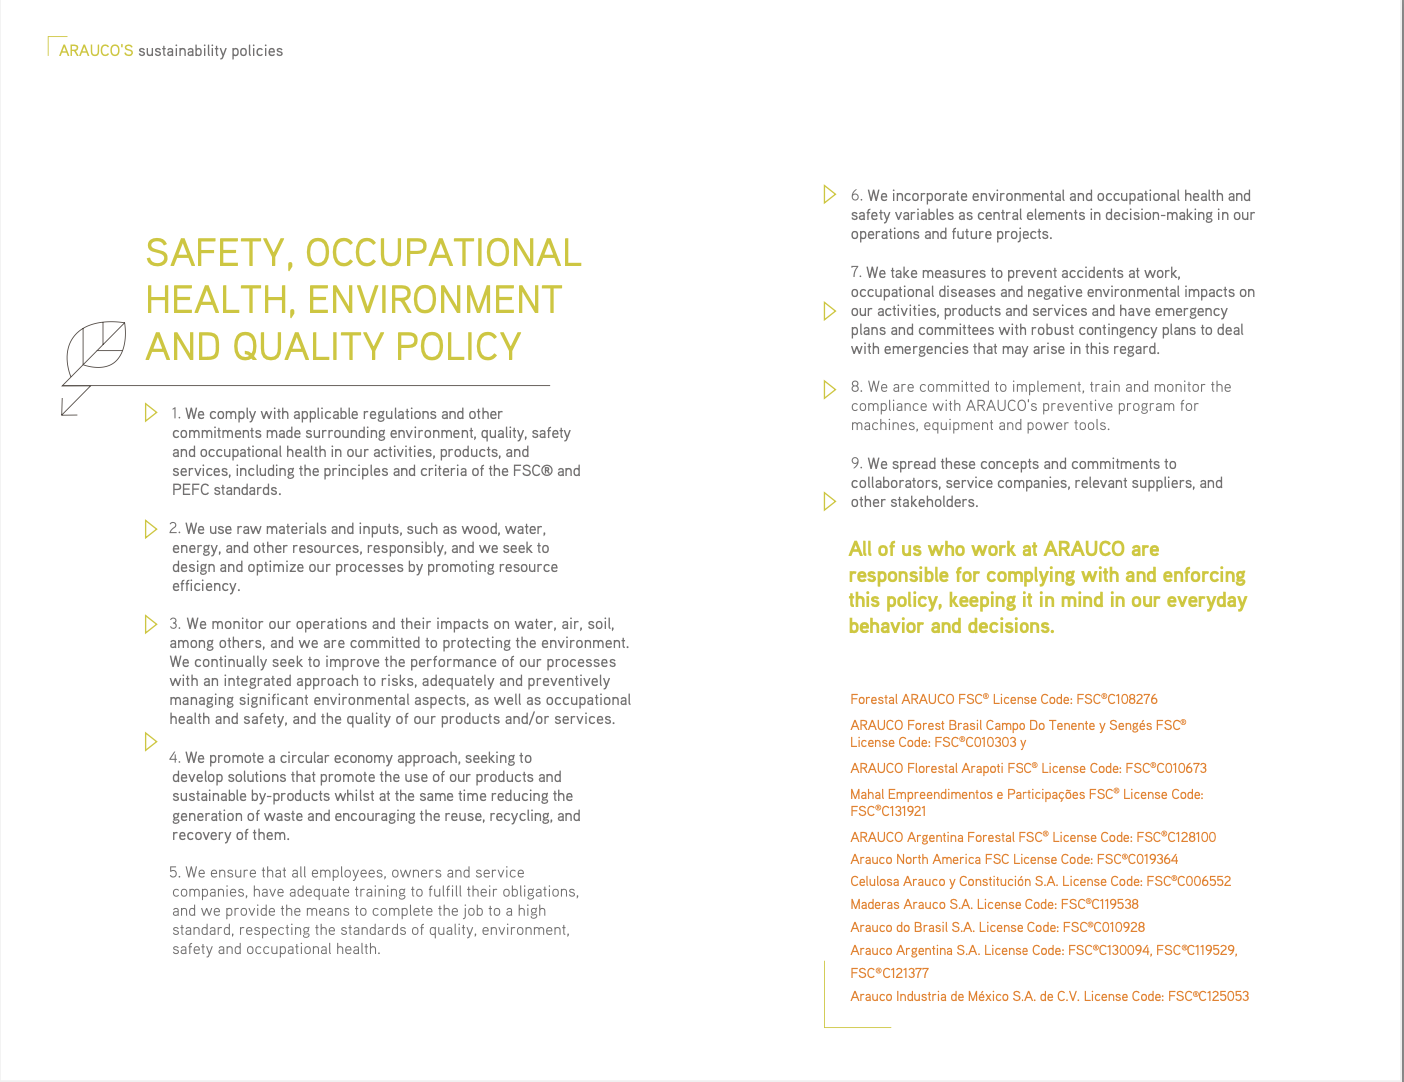 Safety, Occupational Health, Environment And Quality Policy